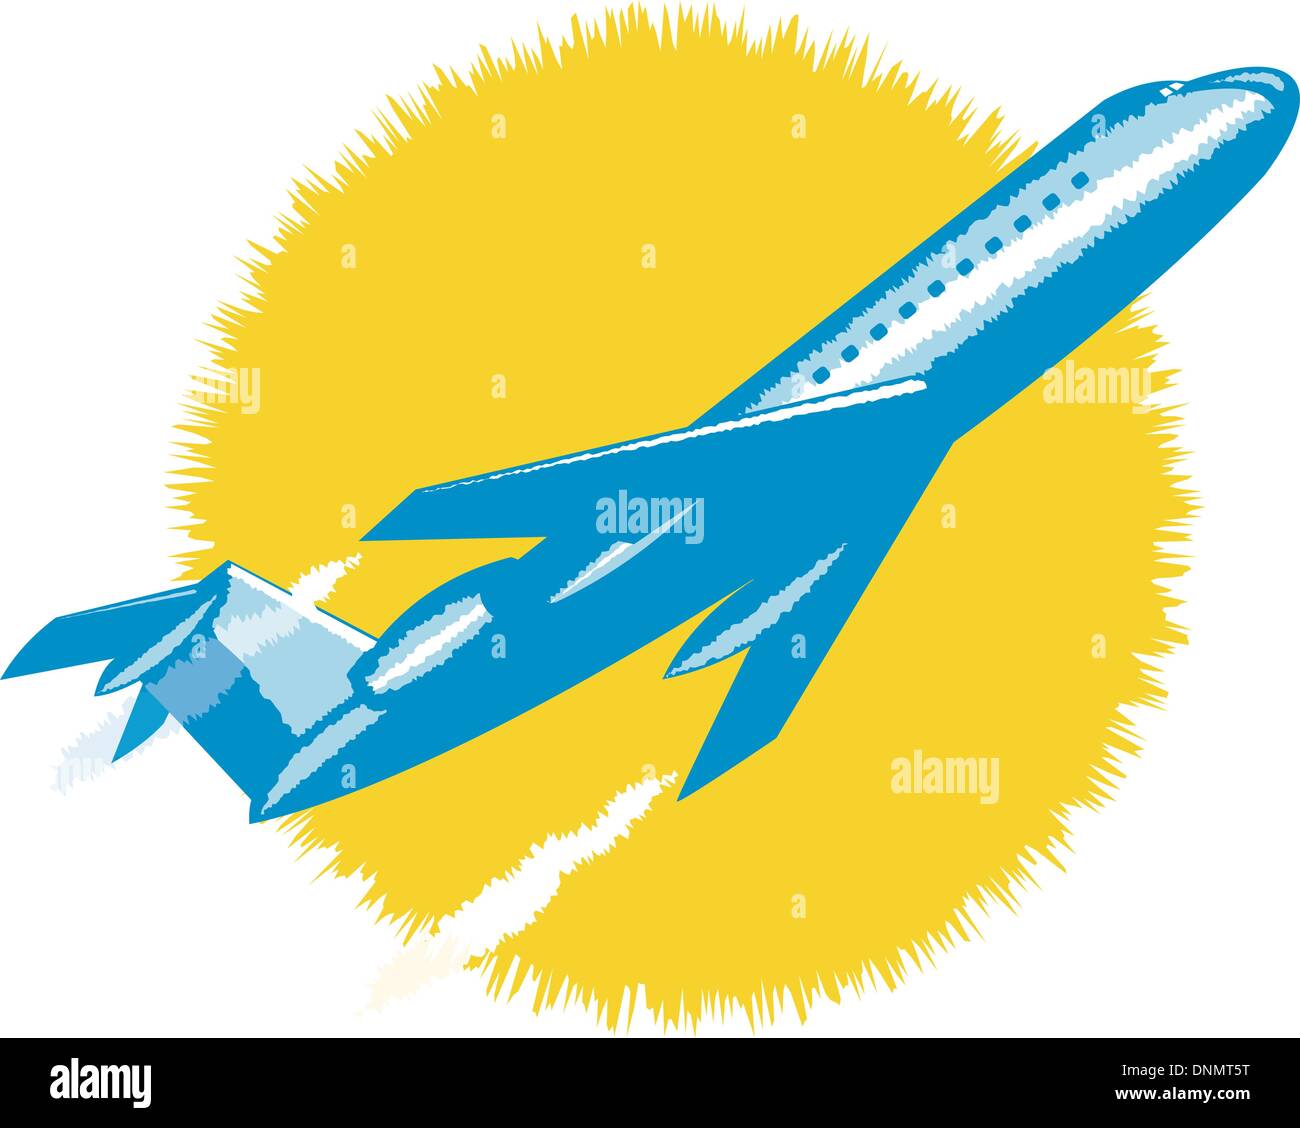 illustration of a commercial jet plane airliner taking off  isolated background Stock Vector